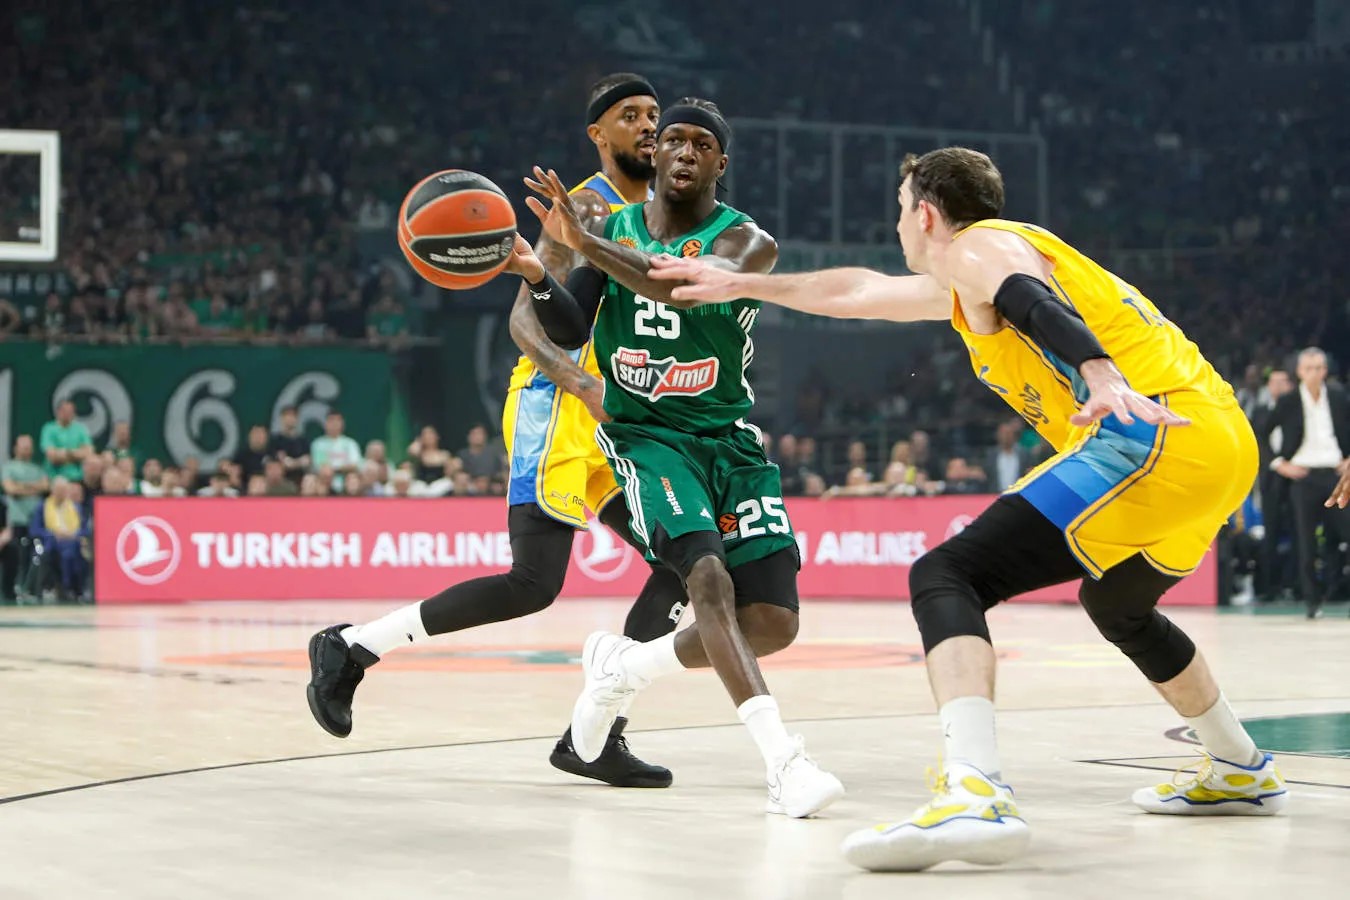 Kendrick Nunn's workrate was simply extraordinary in a must-win game for Panathinaikos.